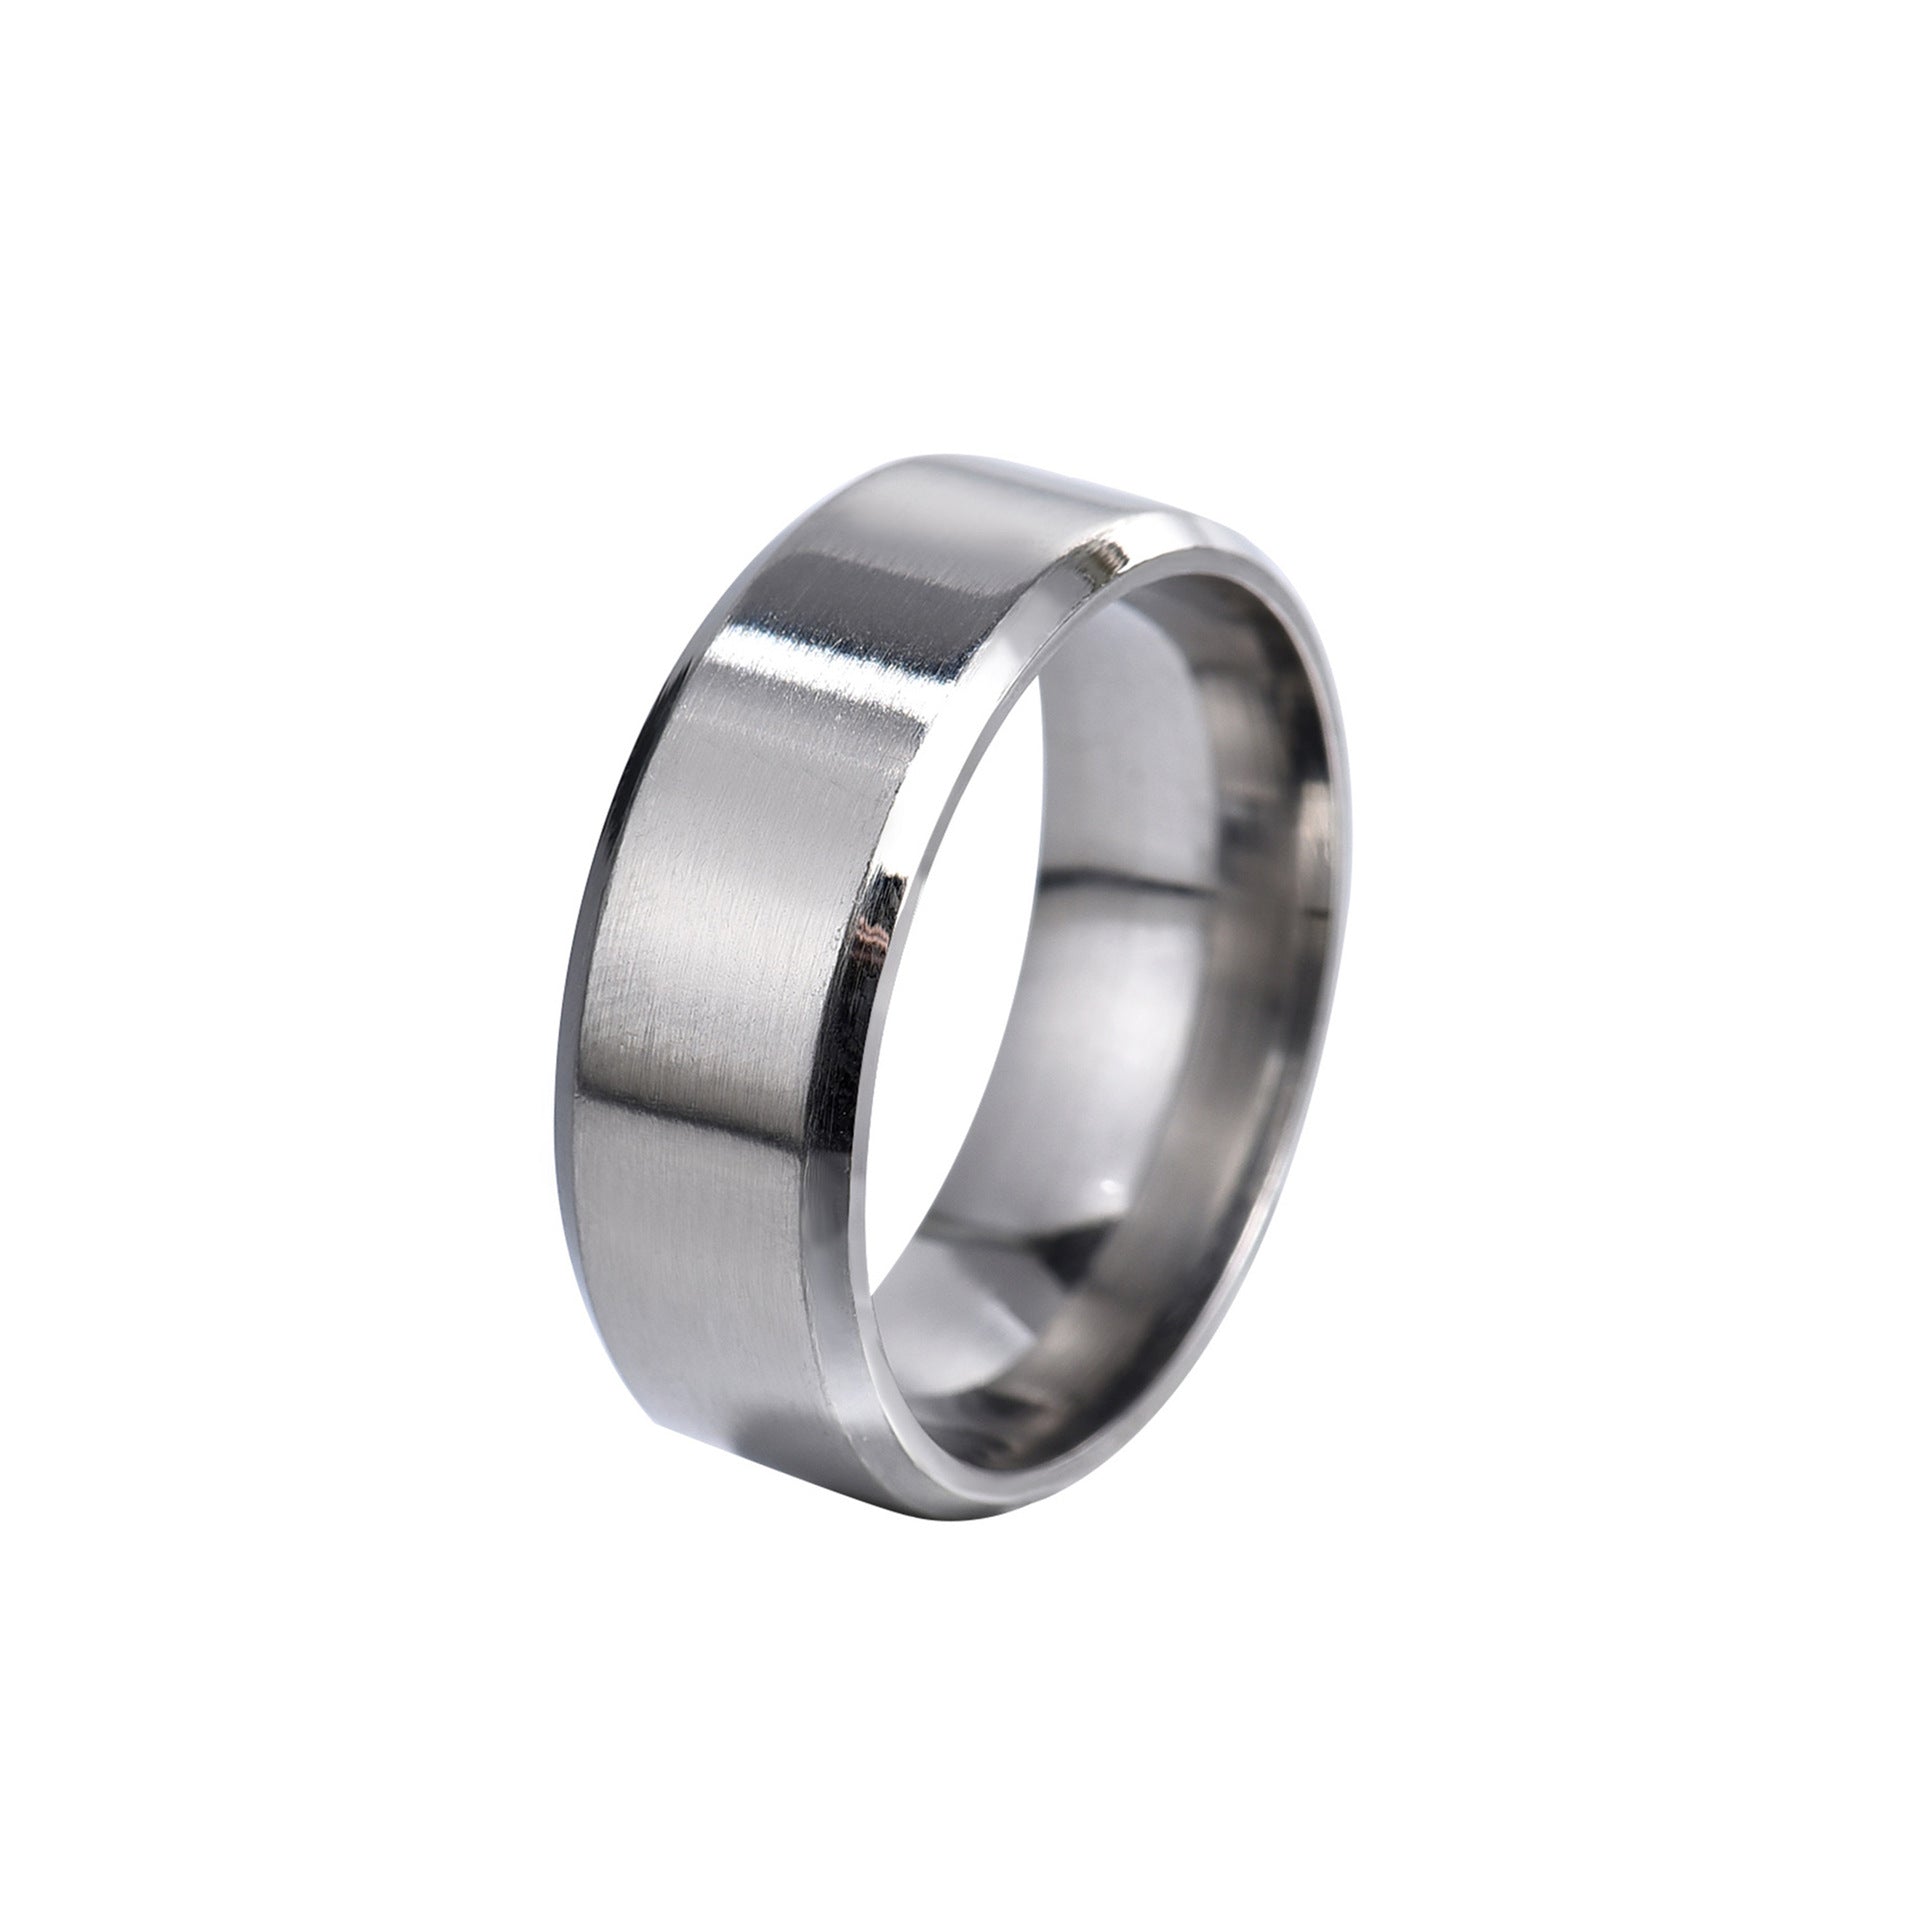 Silver Colored 316L Quality Steel Ring Wedding Ring (12 Sizes)